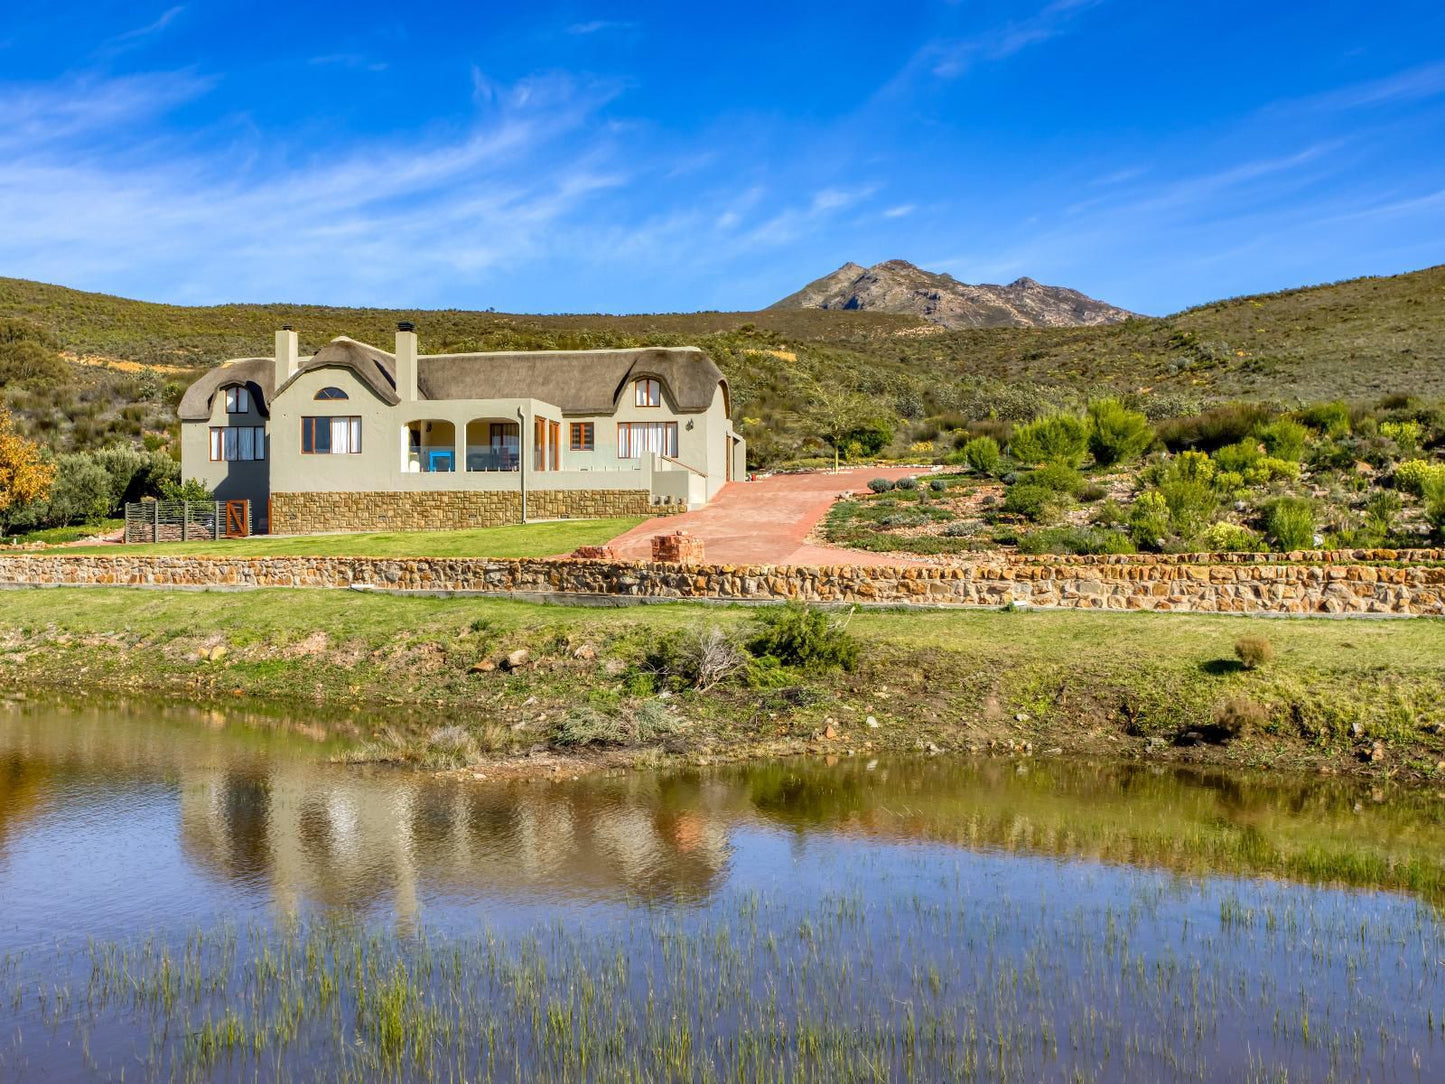 Lord S Wine Farm Boesmanskloof Mcgregor Western Cape South Africa Complementary Colors, House, Building, Architecture